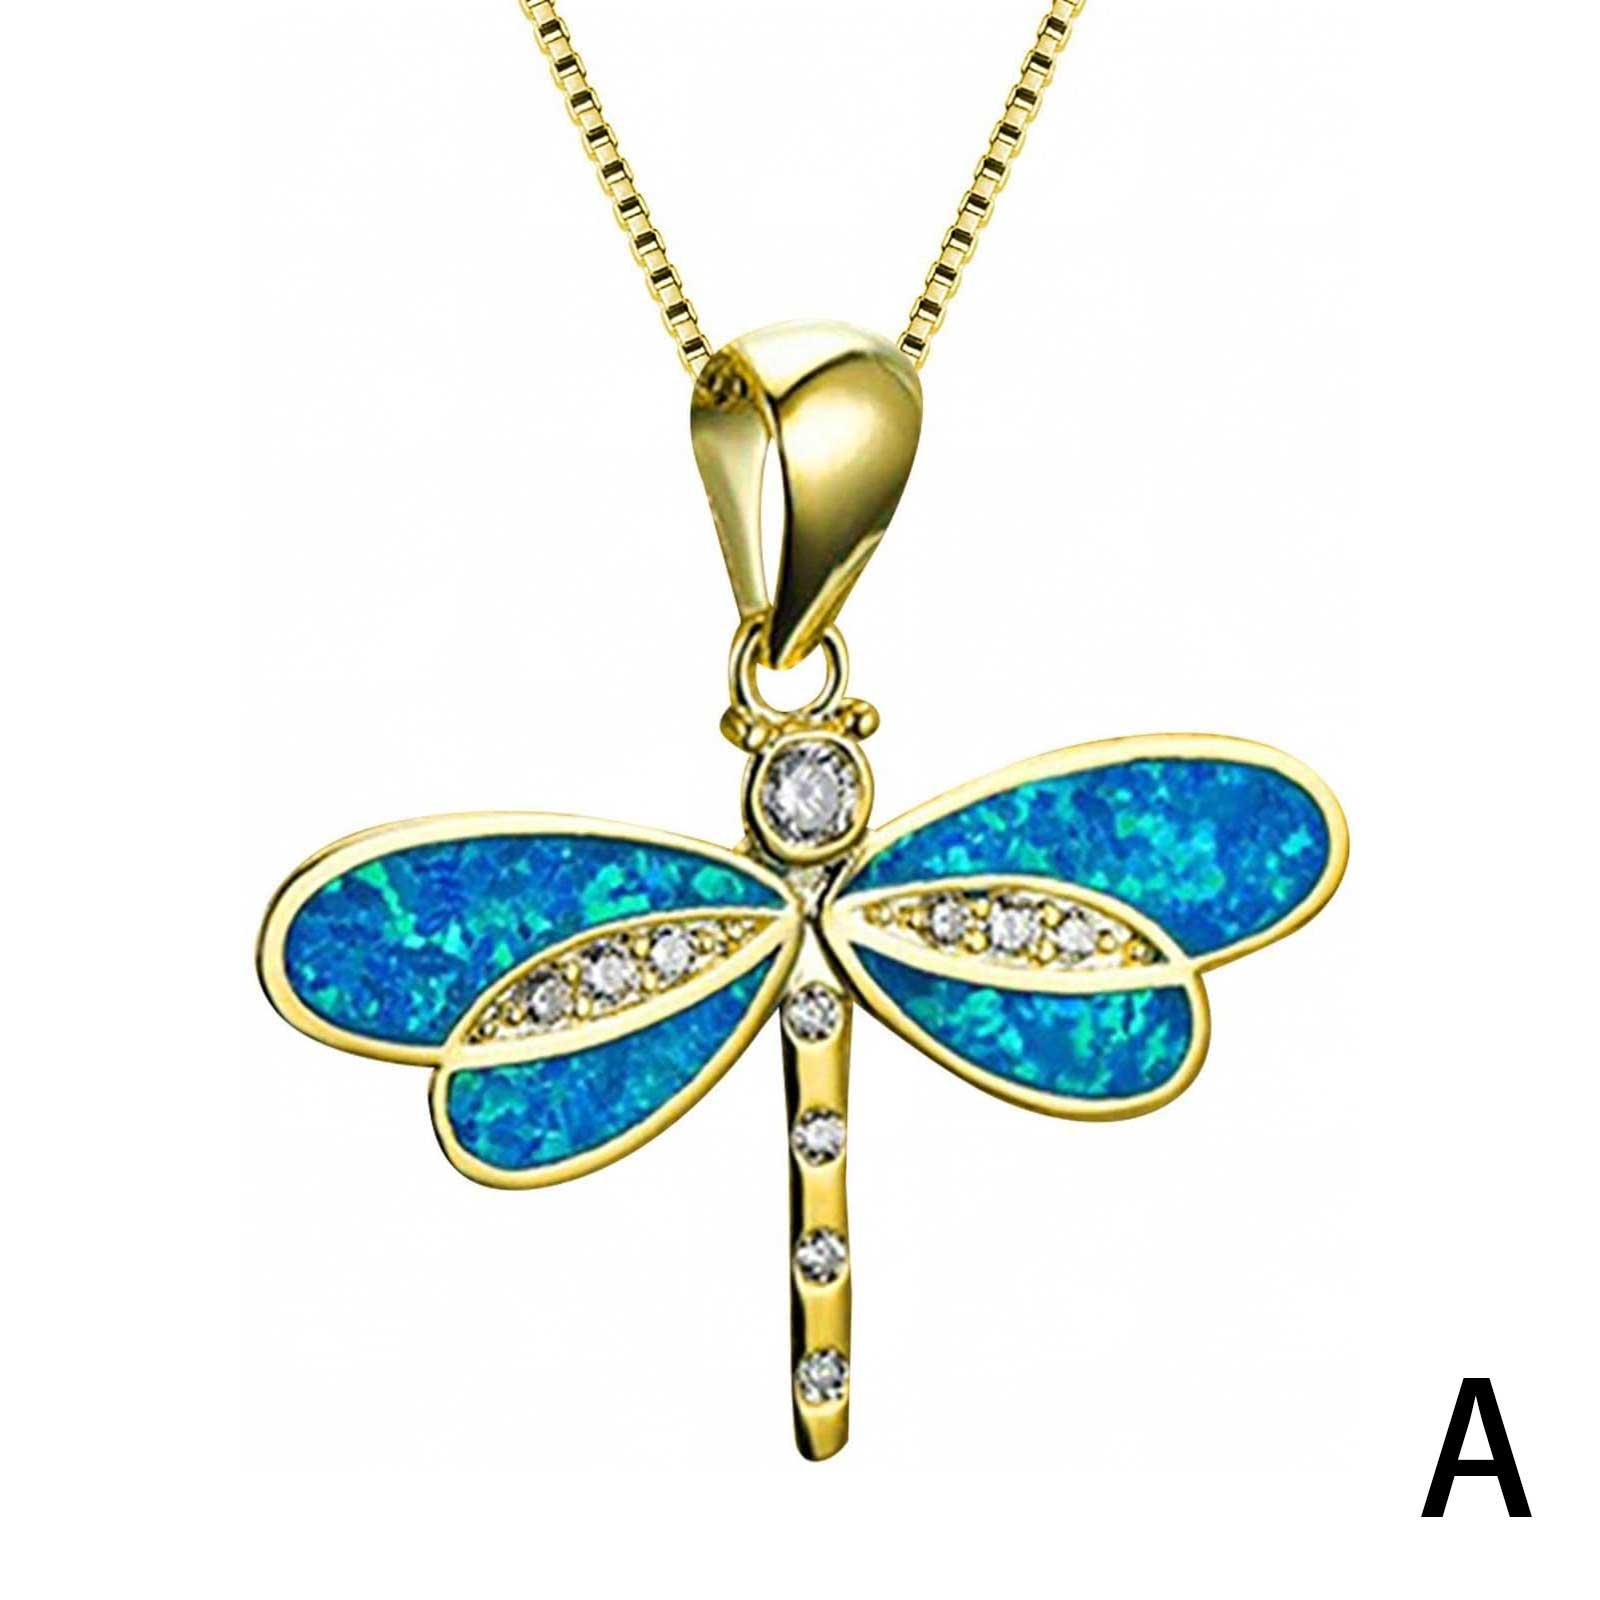 Dragonfly Necklace Pendant Choker For Women Girls Gold Silver White Blue Opal Z0T2 - image 1 of 9